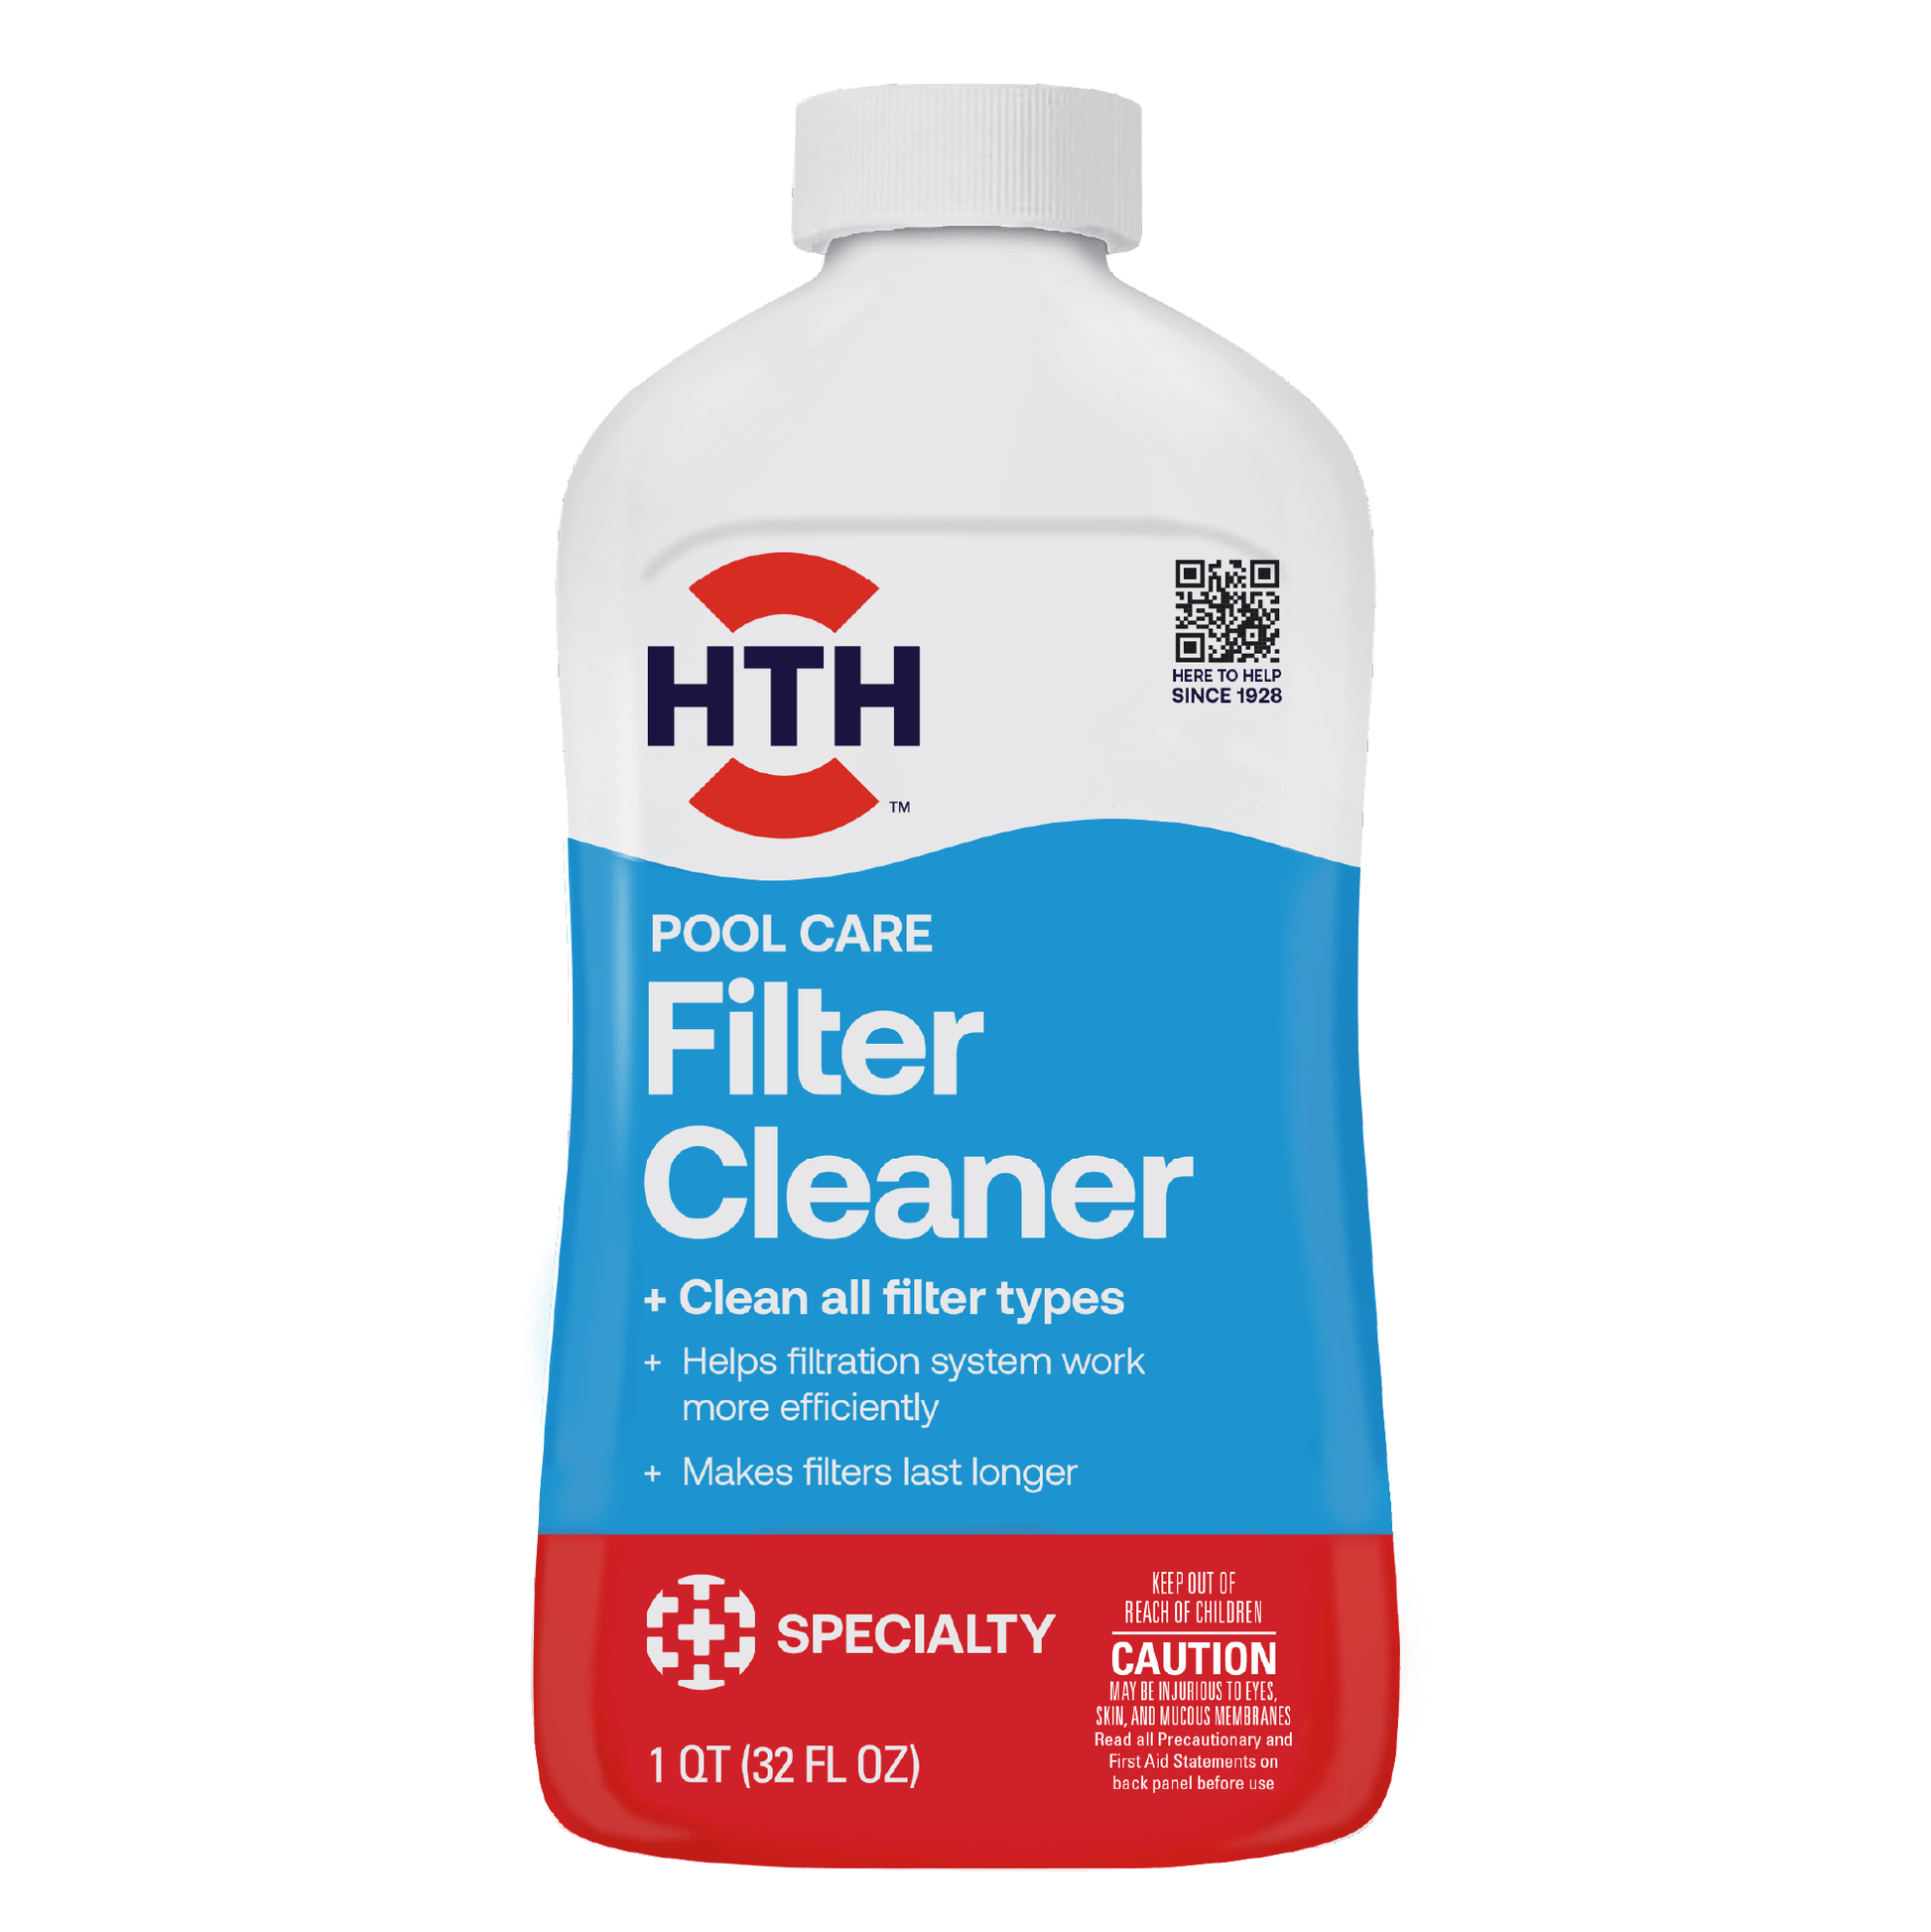 HTH™ Pool Care Filter Cleaner: Universal Pool Filter Cleaner | HTH